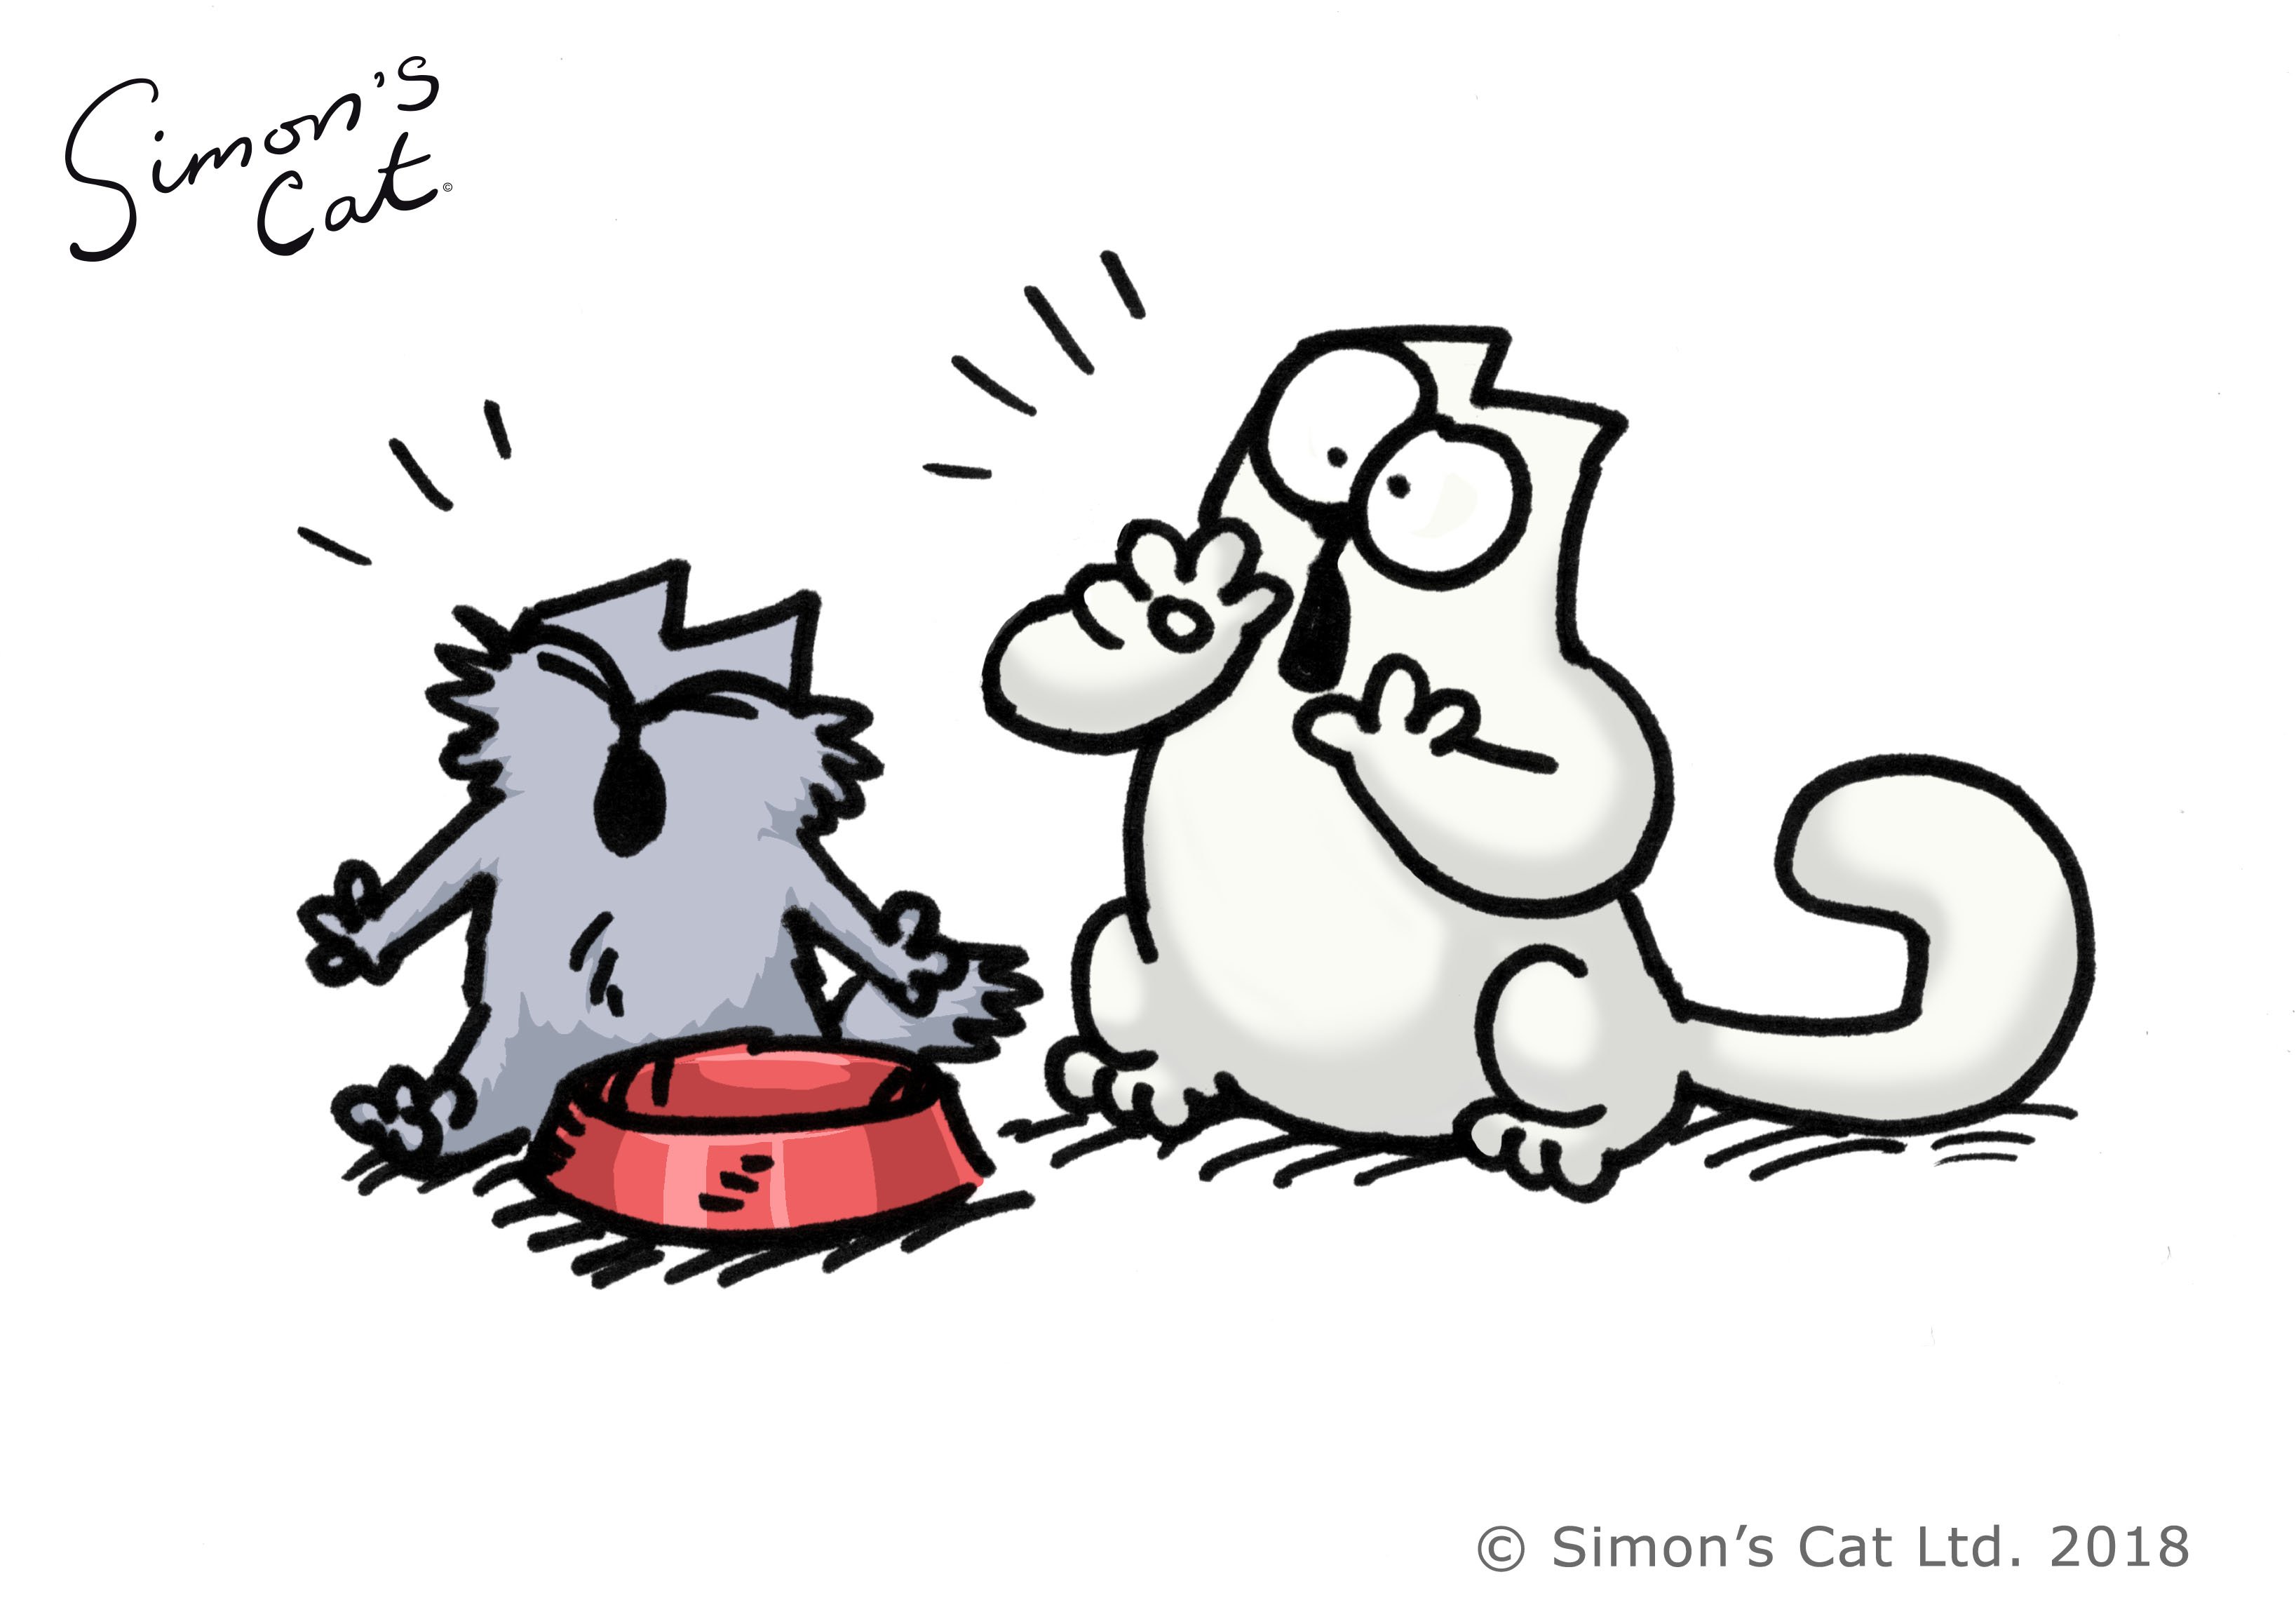 Simon's Cat 🐾 on X: WE NEED YOU! Would you be interested in a